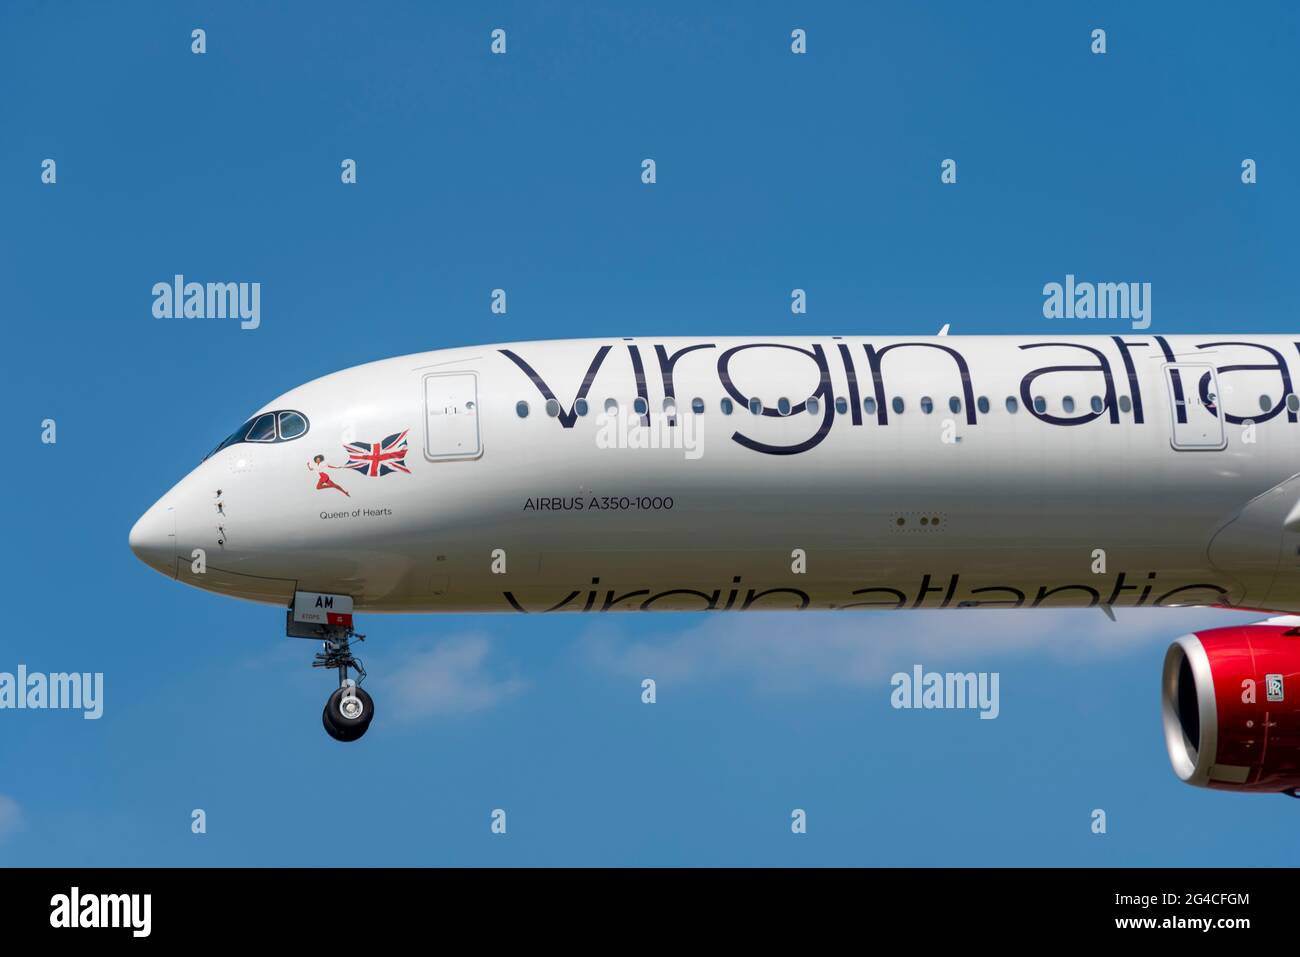 Virgin Atlantic Airbus A350 airliner jet plane G-VJAM named Queen of Hearts coming in on finals to land at London Heathrow Airport, UK. Nose art Stock Photo